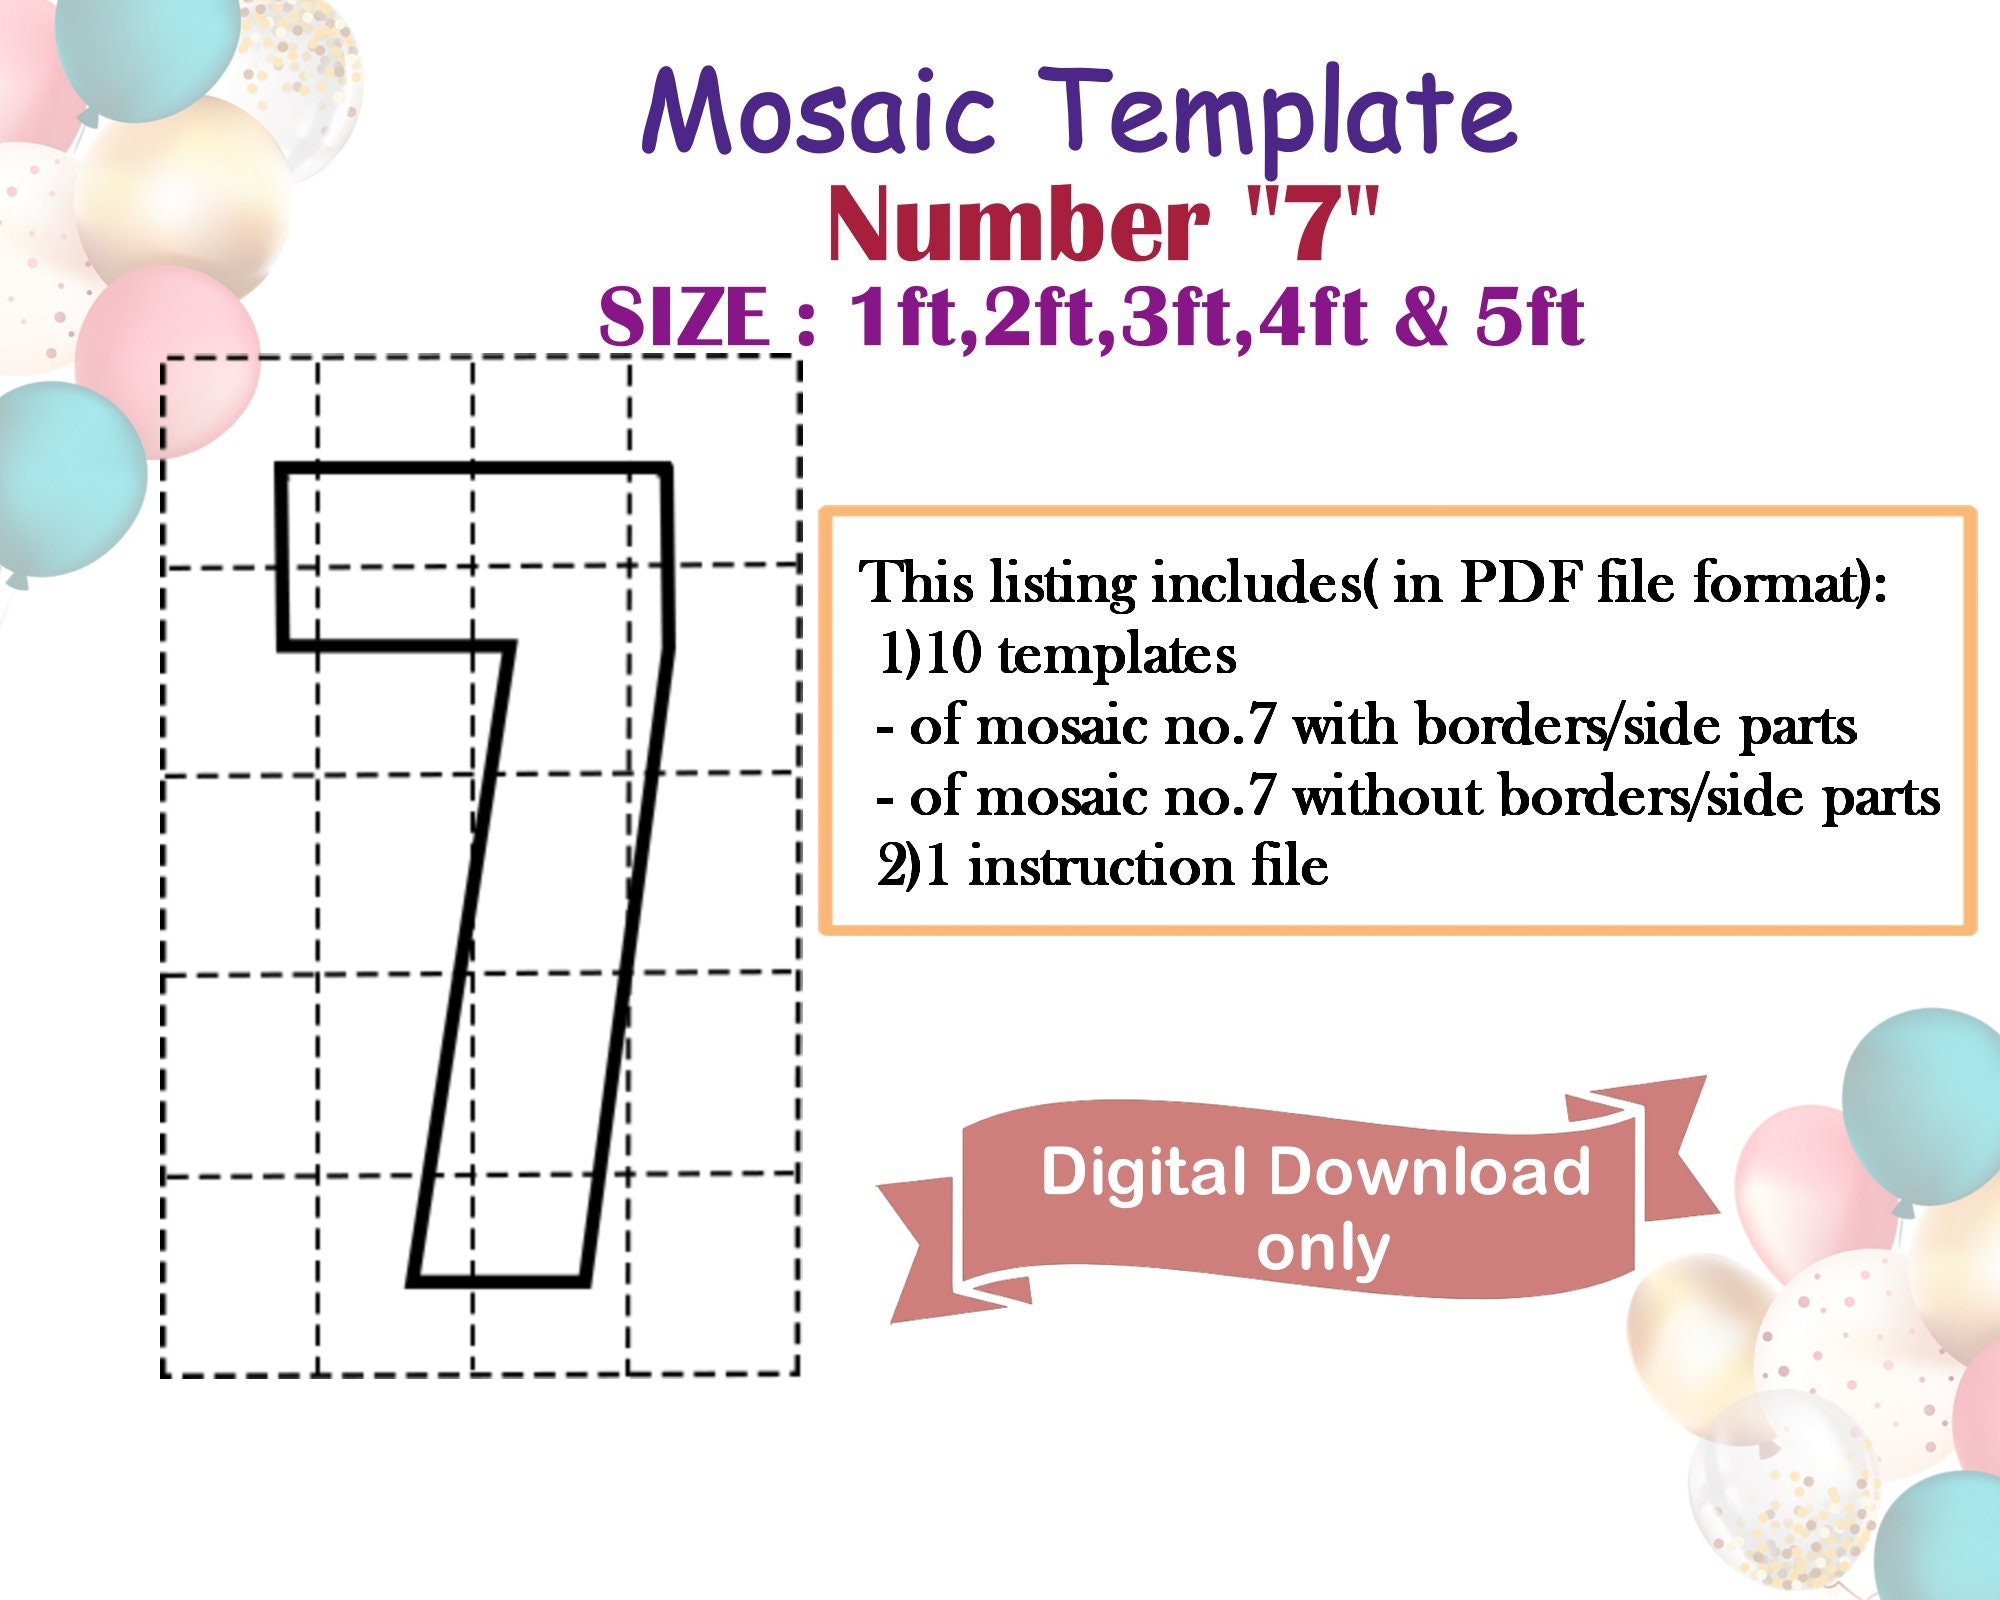 How To Make A Balloon Mosaic Template